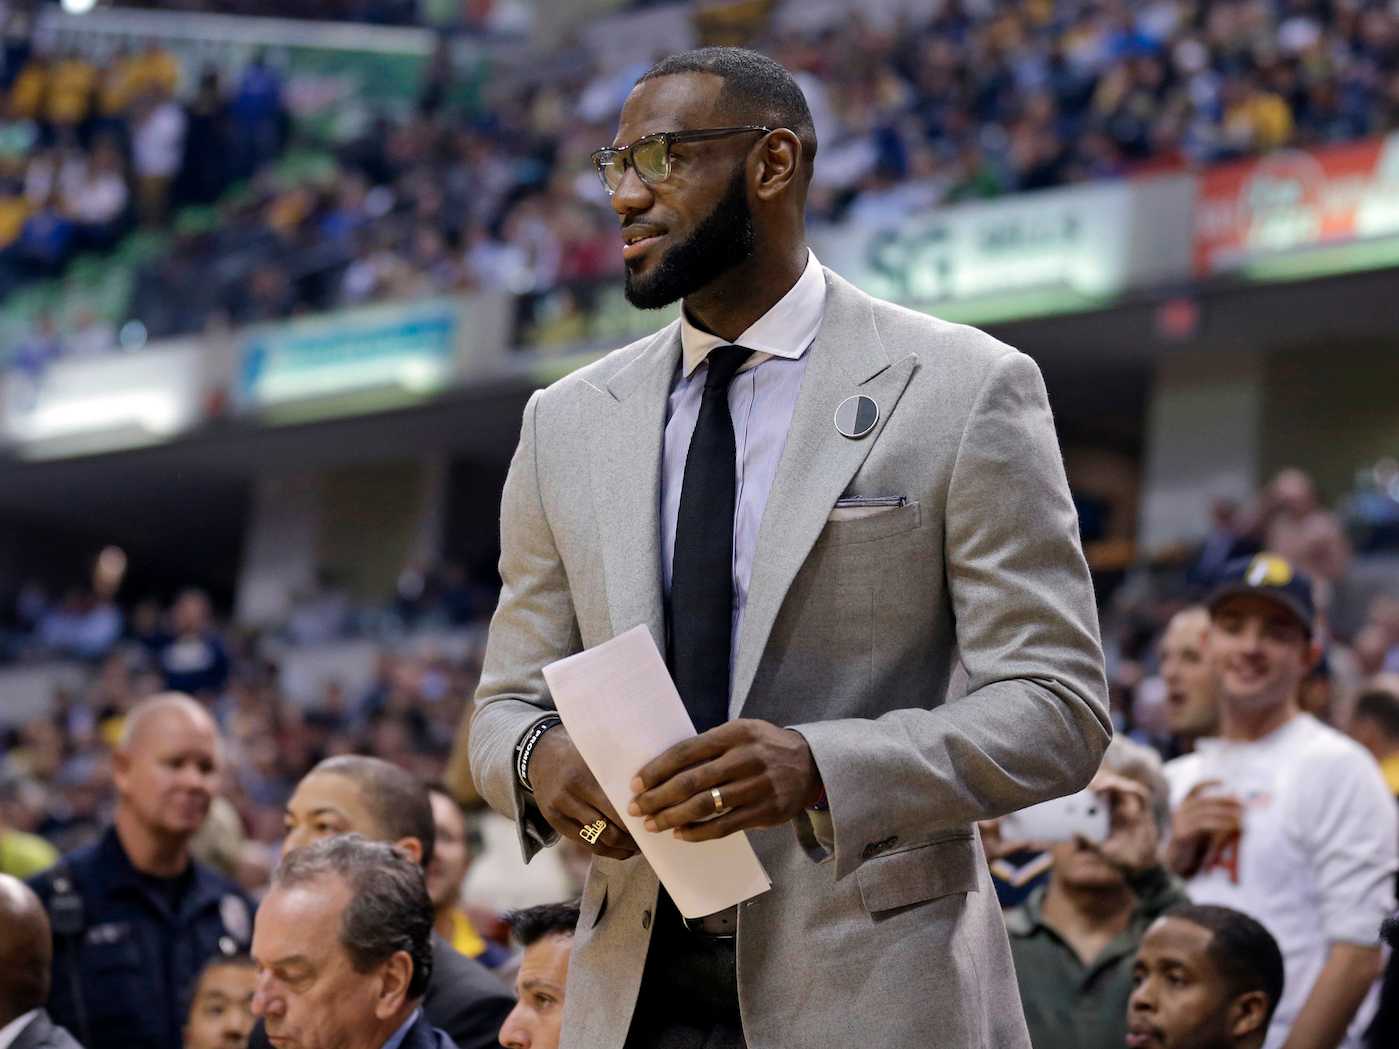 lebron-james-was-reportedly-surprised-and-disappointed-by-the-dismissal-of-gm-david-griffin